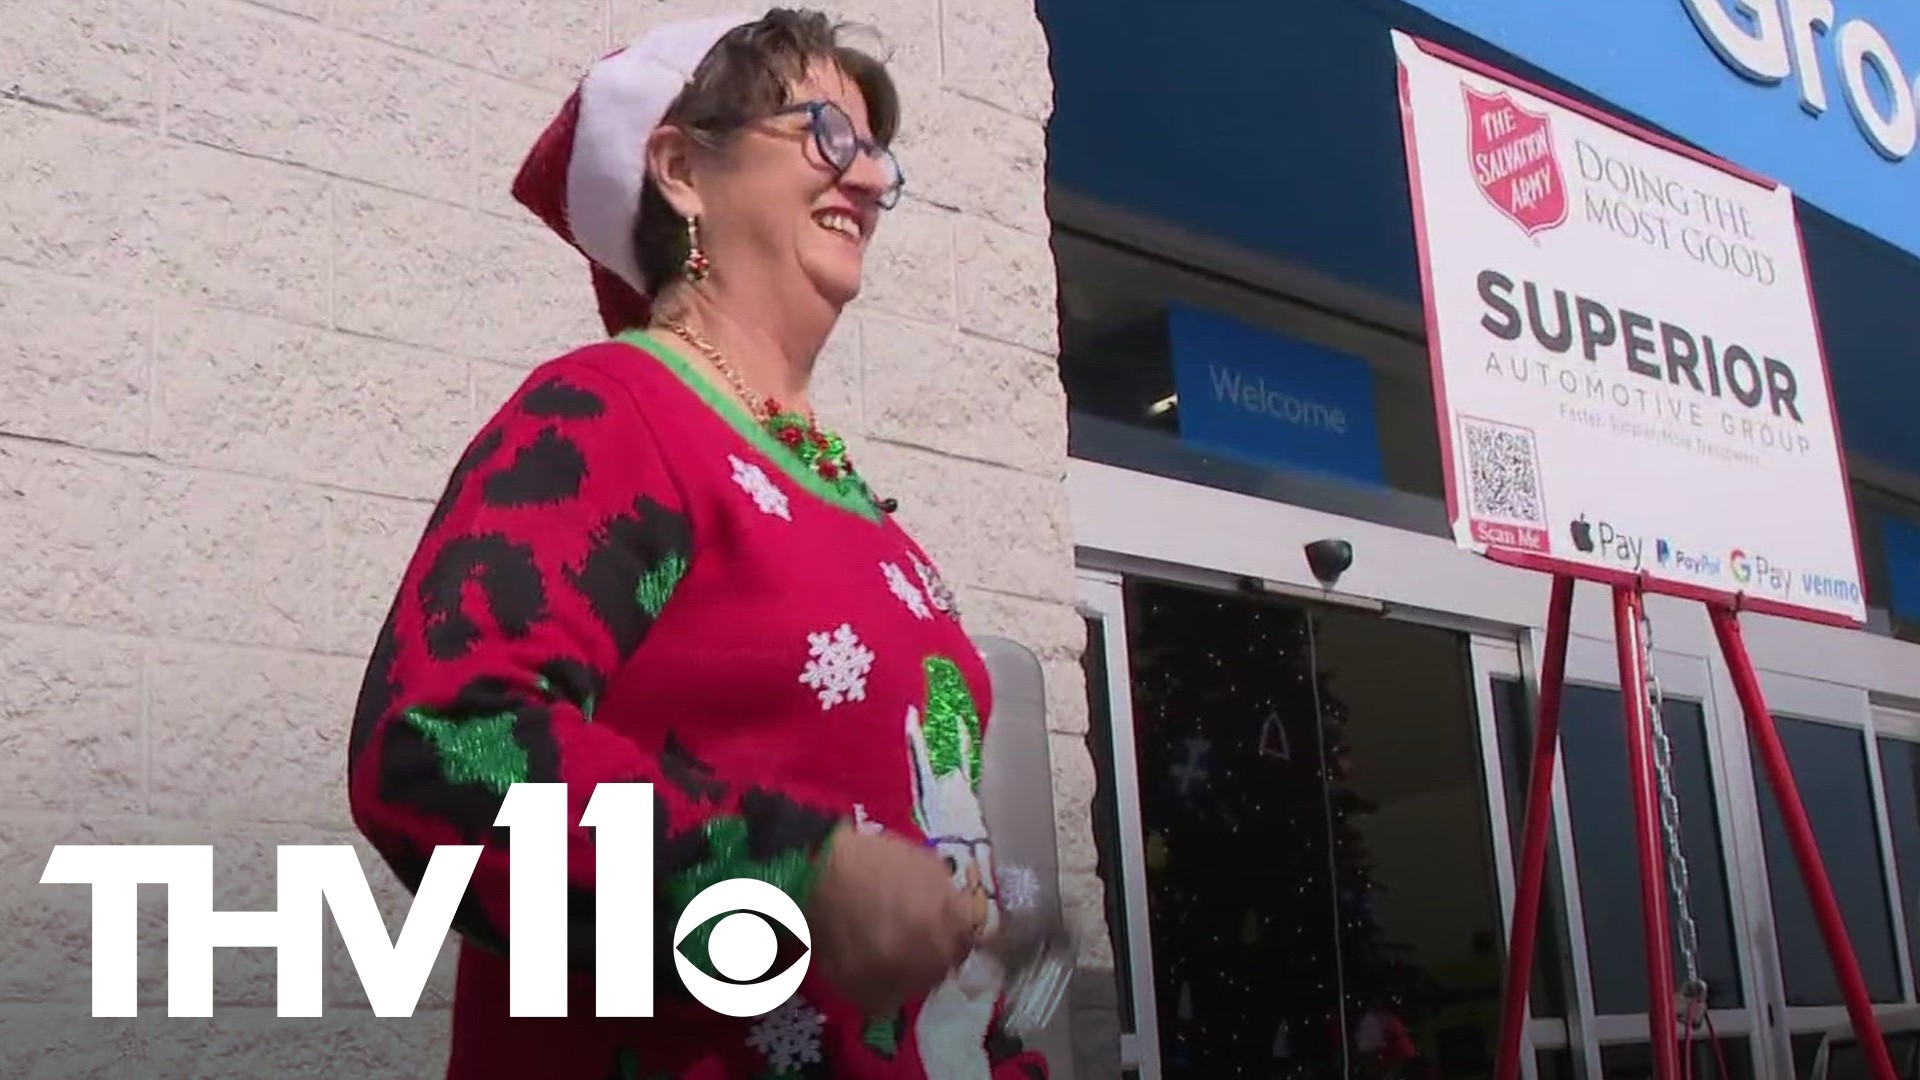 Her daughter, who passed away due to chemotherapy complications, had a secret bucket list. Now, this mom is bell ringing as part of her mission to finish that list.